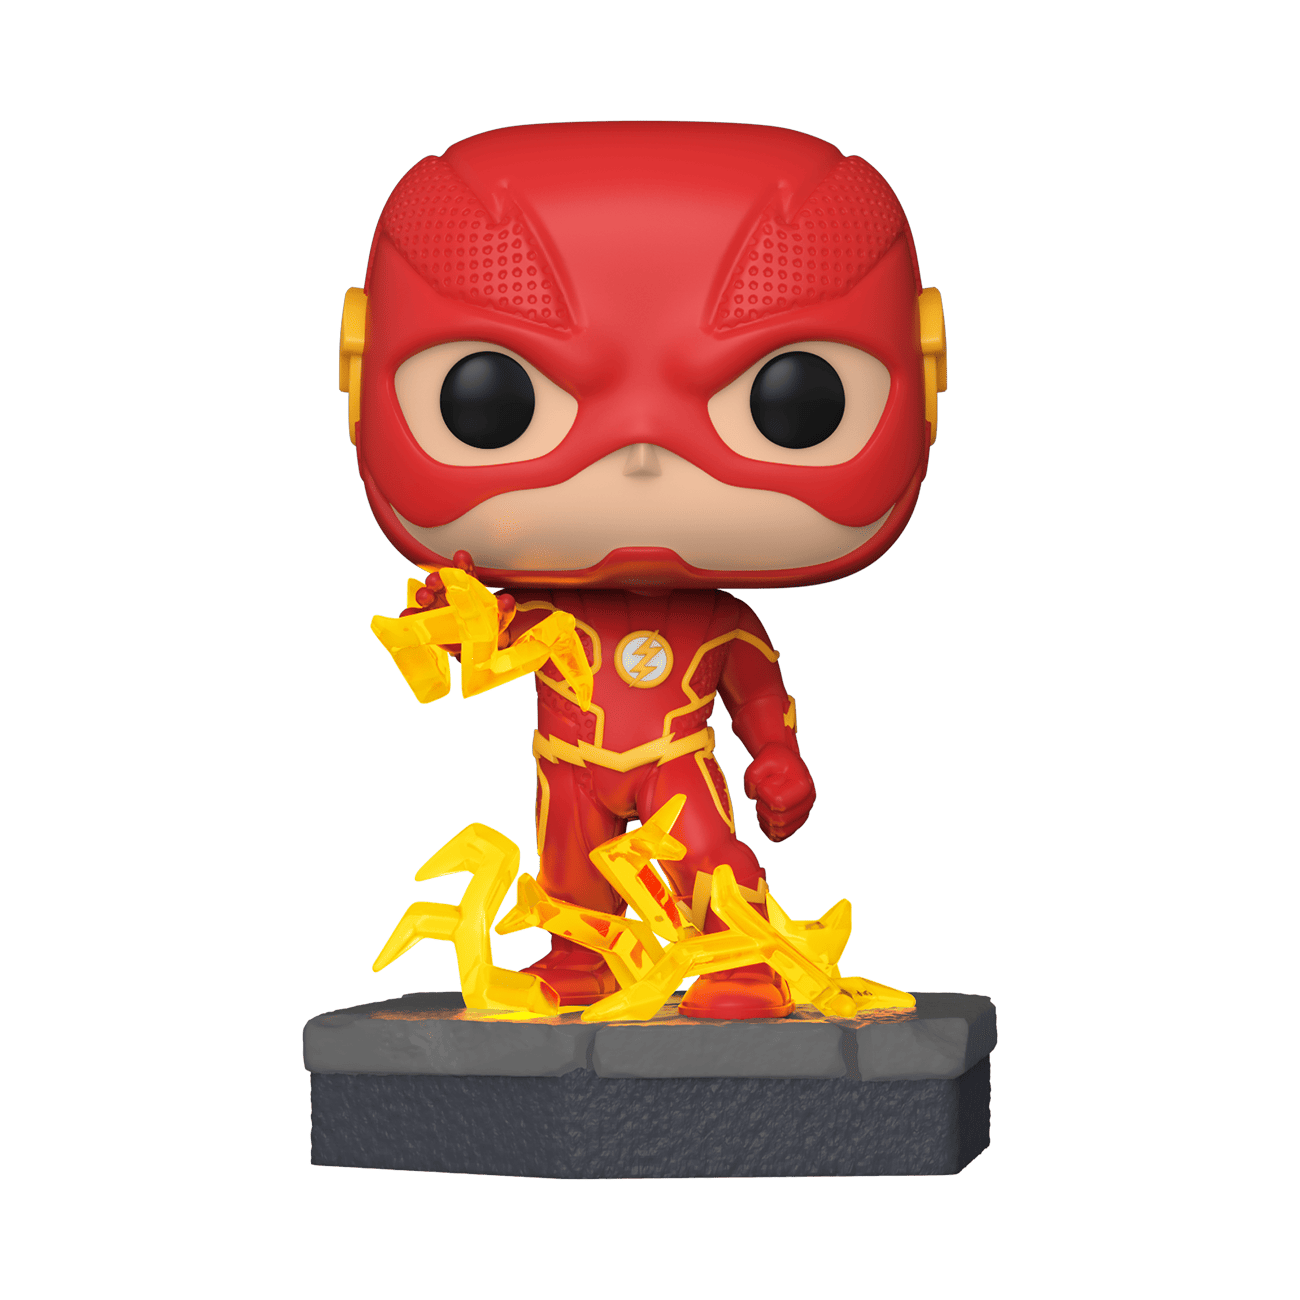 verkoper Ophef Tact Buy Pop! The Flash Lights & Sound at Funko.